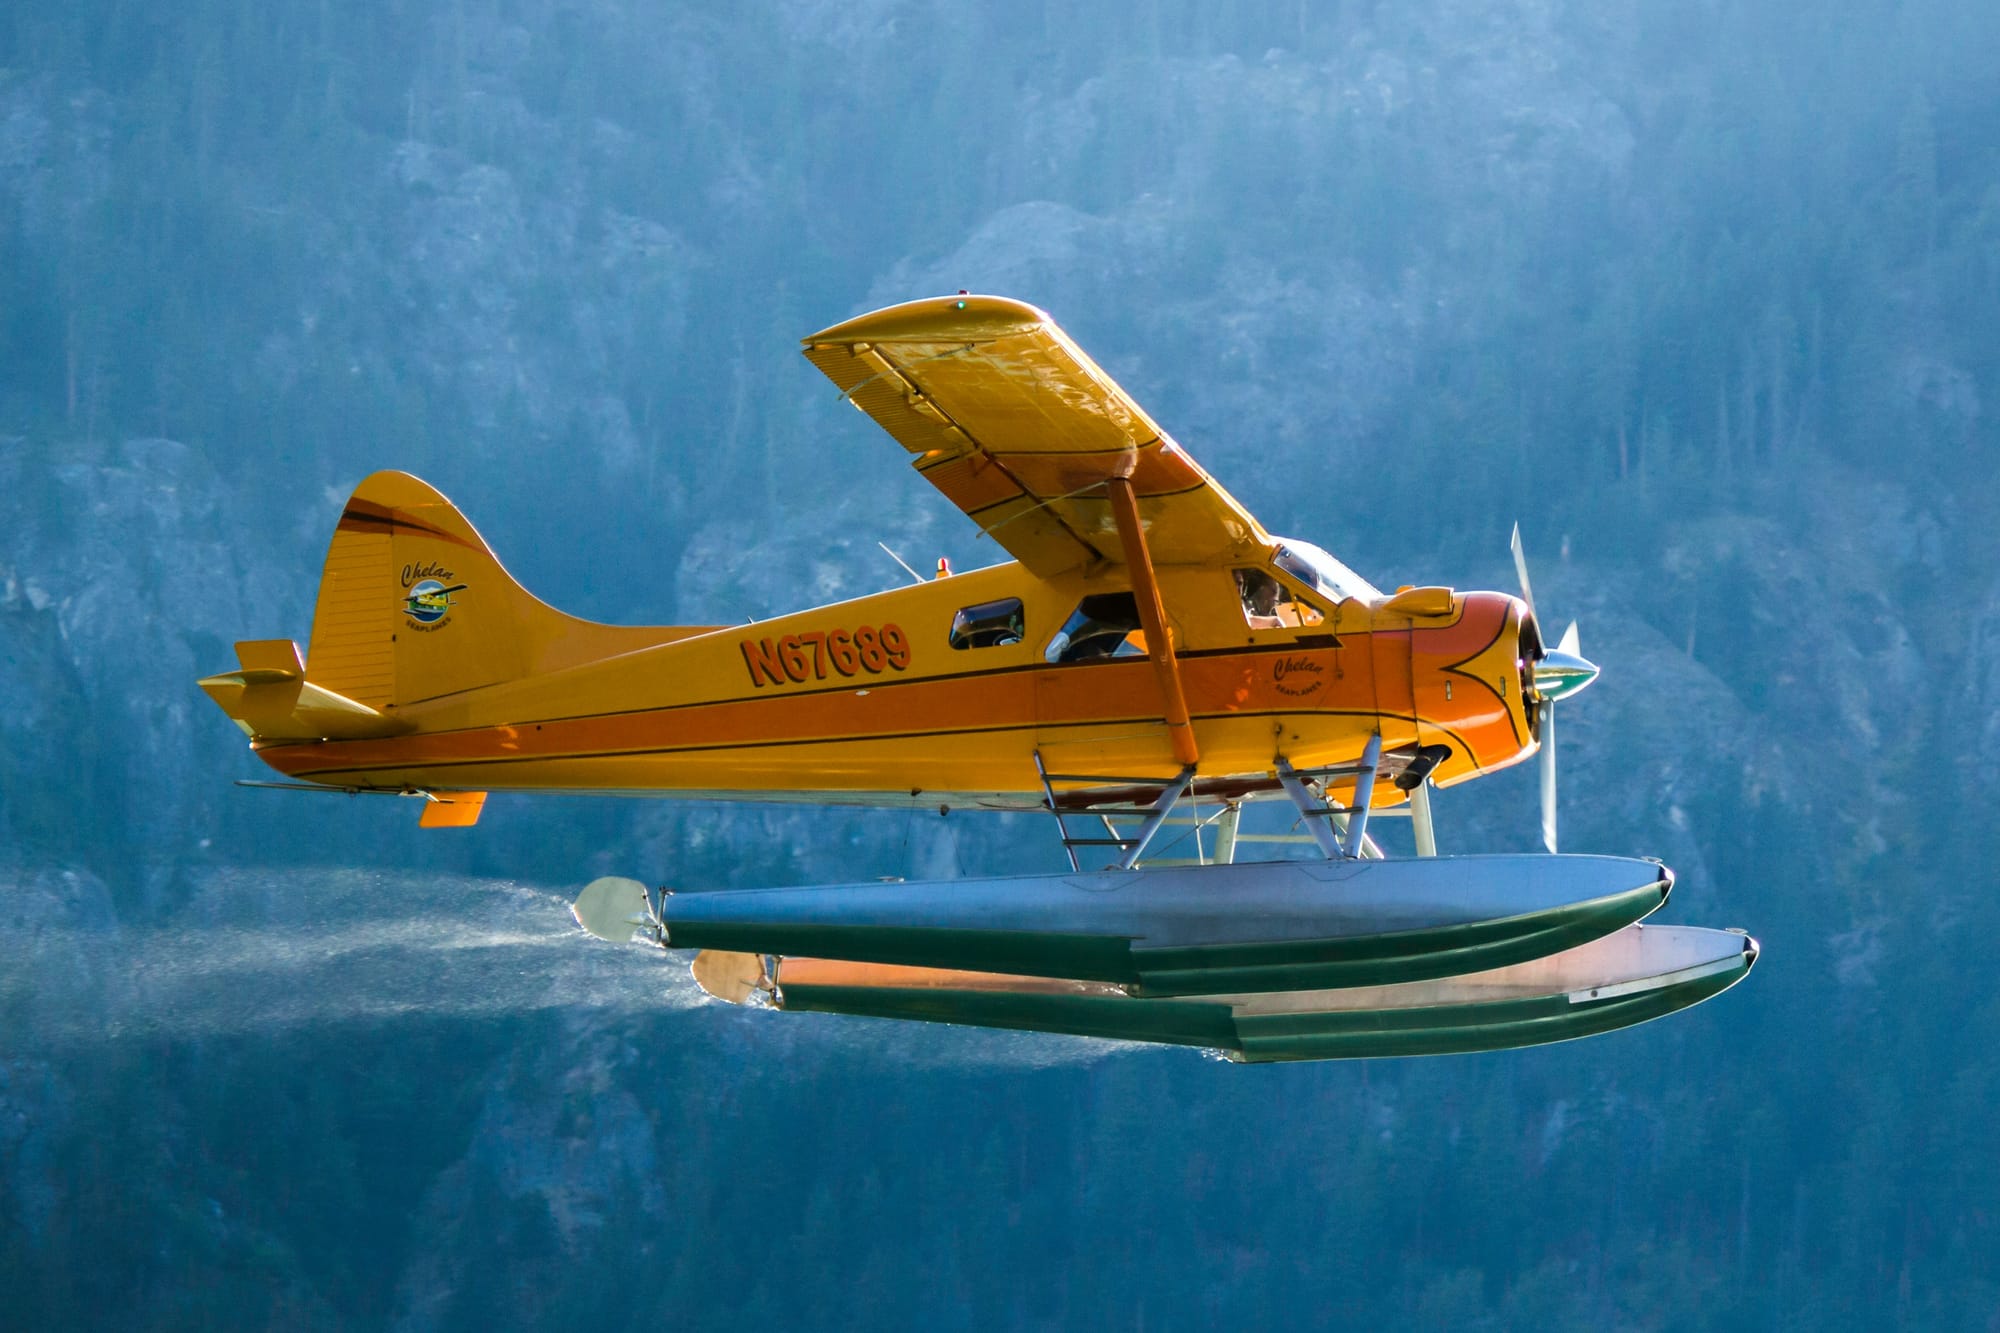 Who has the right of way: Seaplane or Boat?